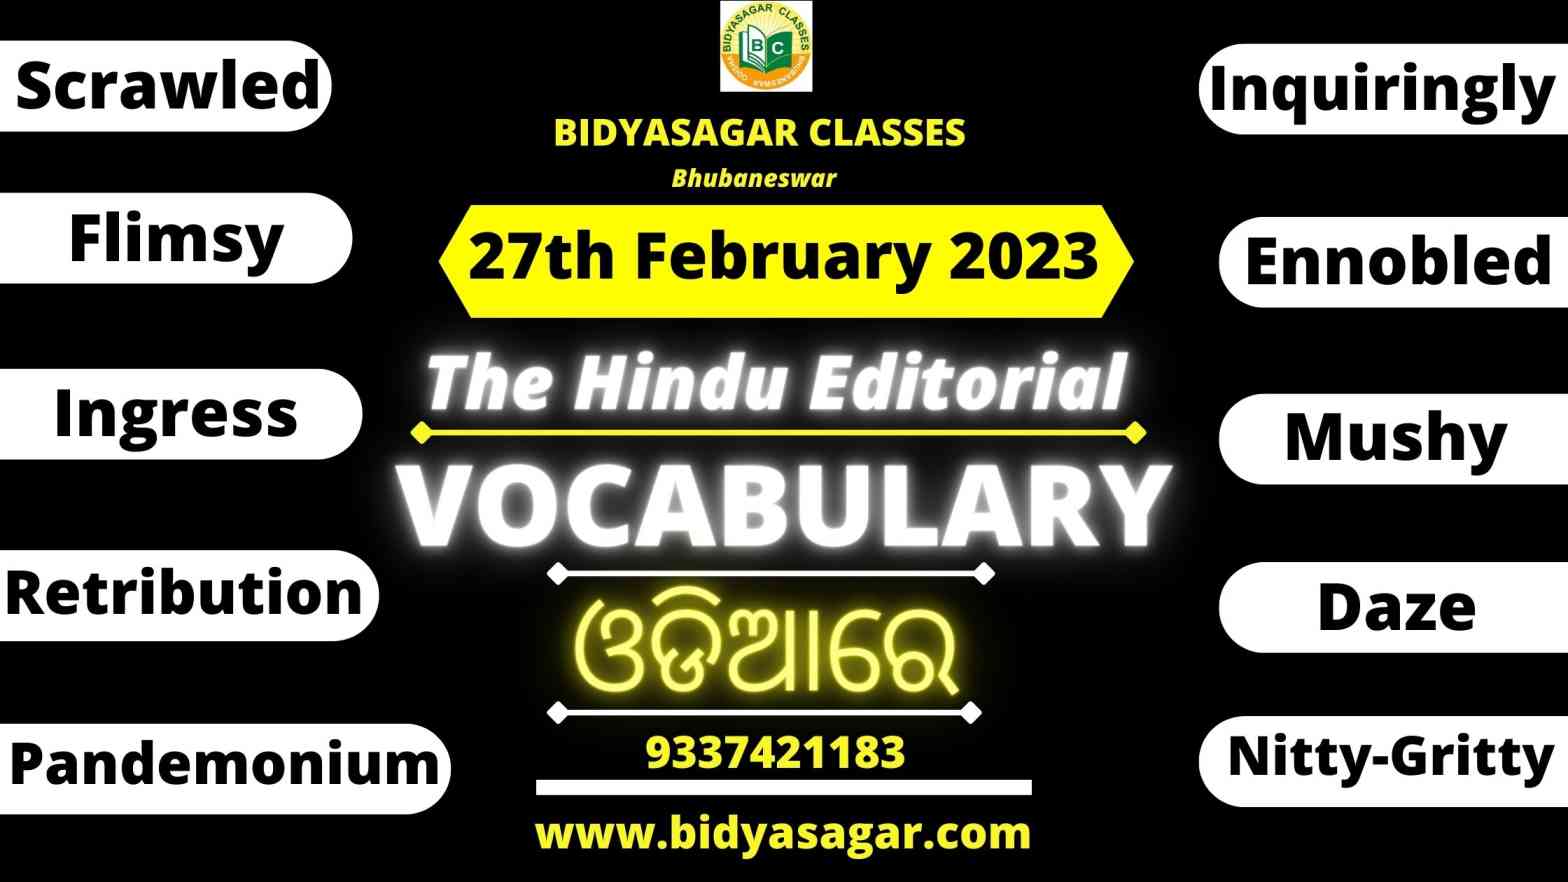 The Hindu Editorial Vocabulary of 27th February 2023